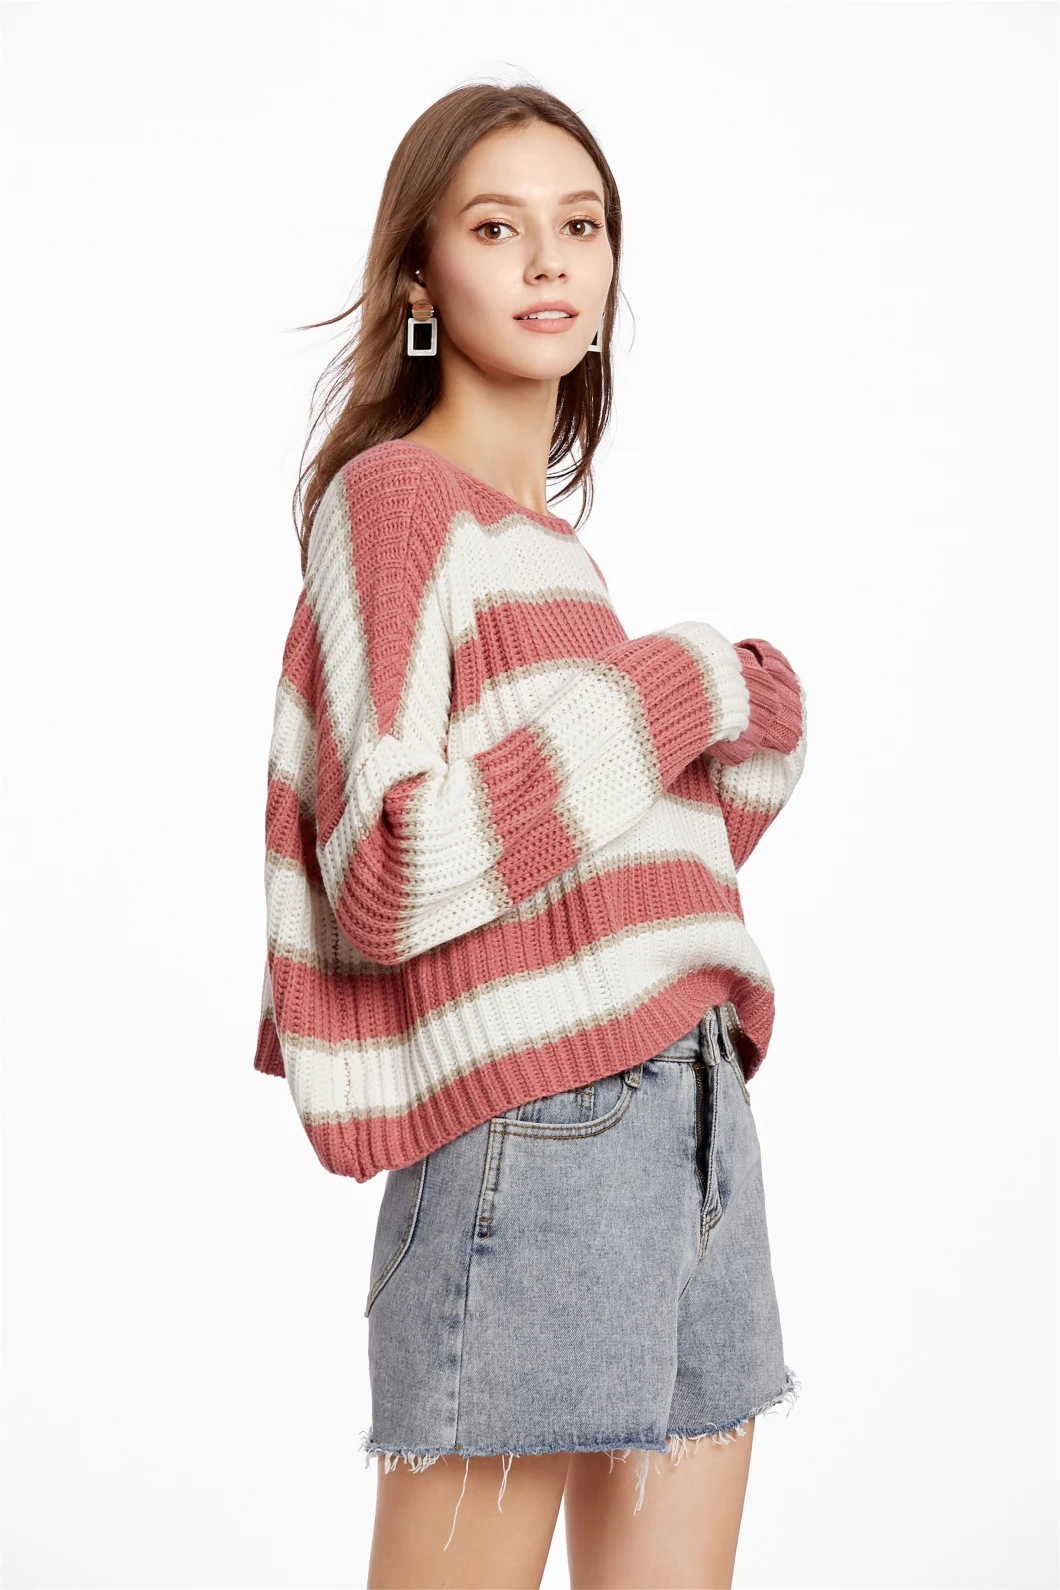 Round Neck Striped Sweater Loose Apparel Fashion Casual Pullover Knitwear